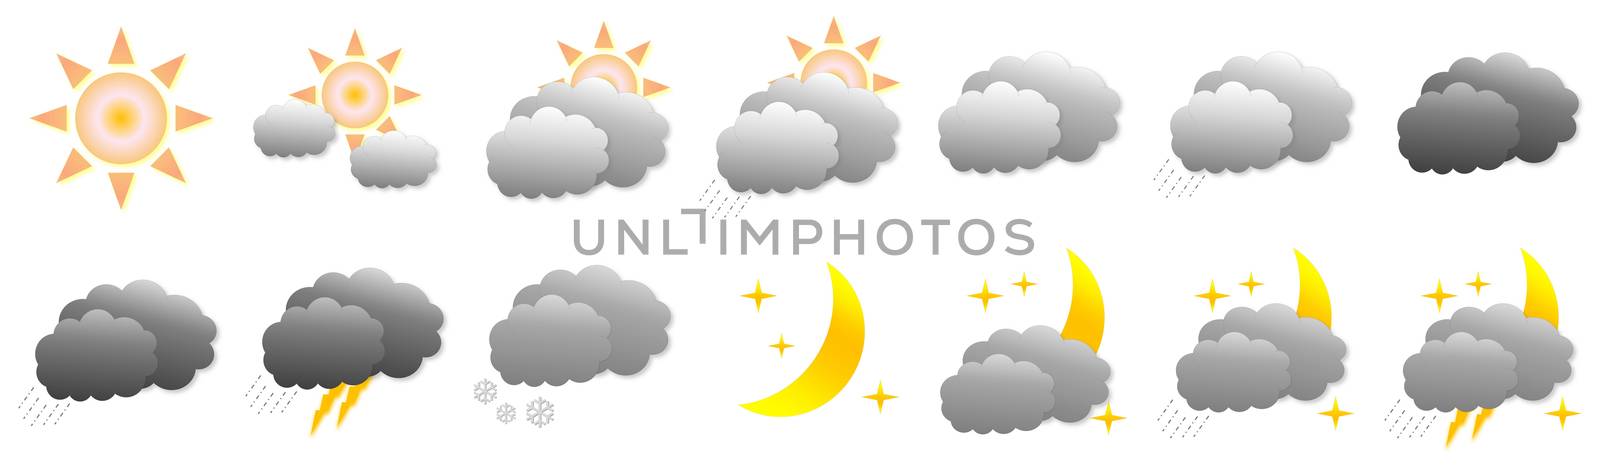 Set of different weather icons in white background